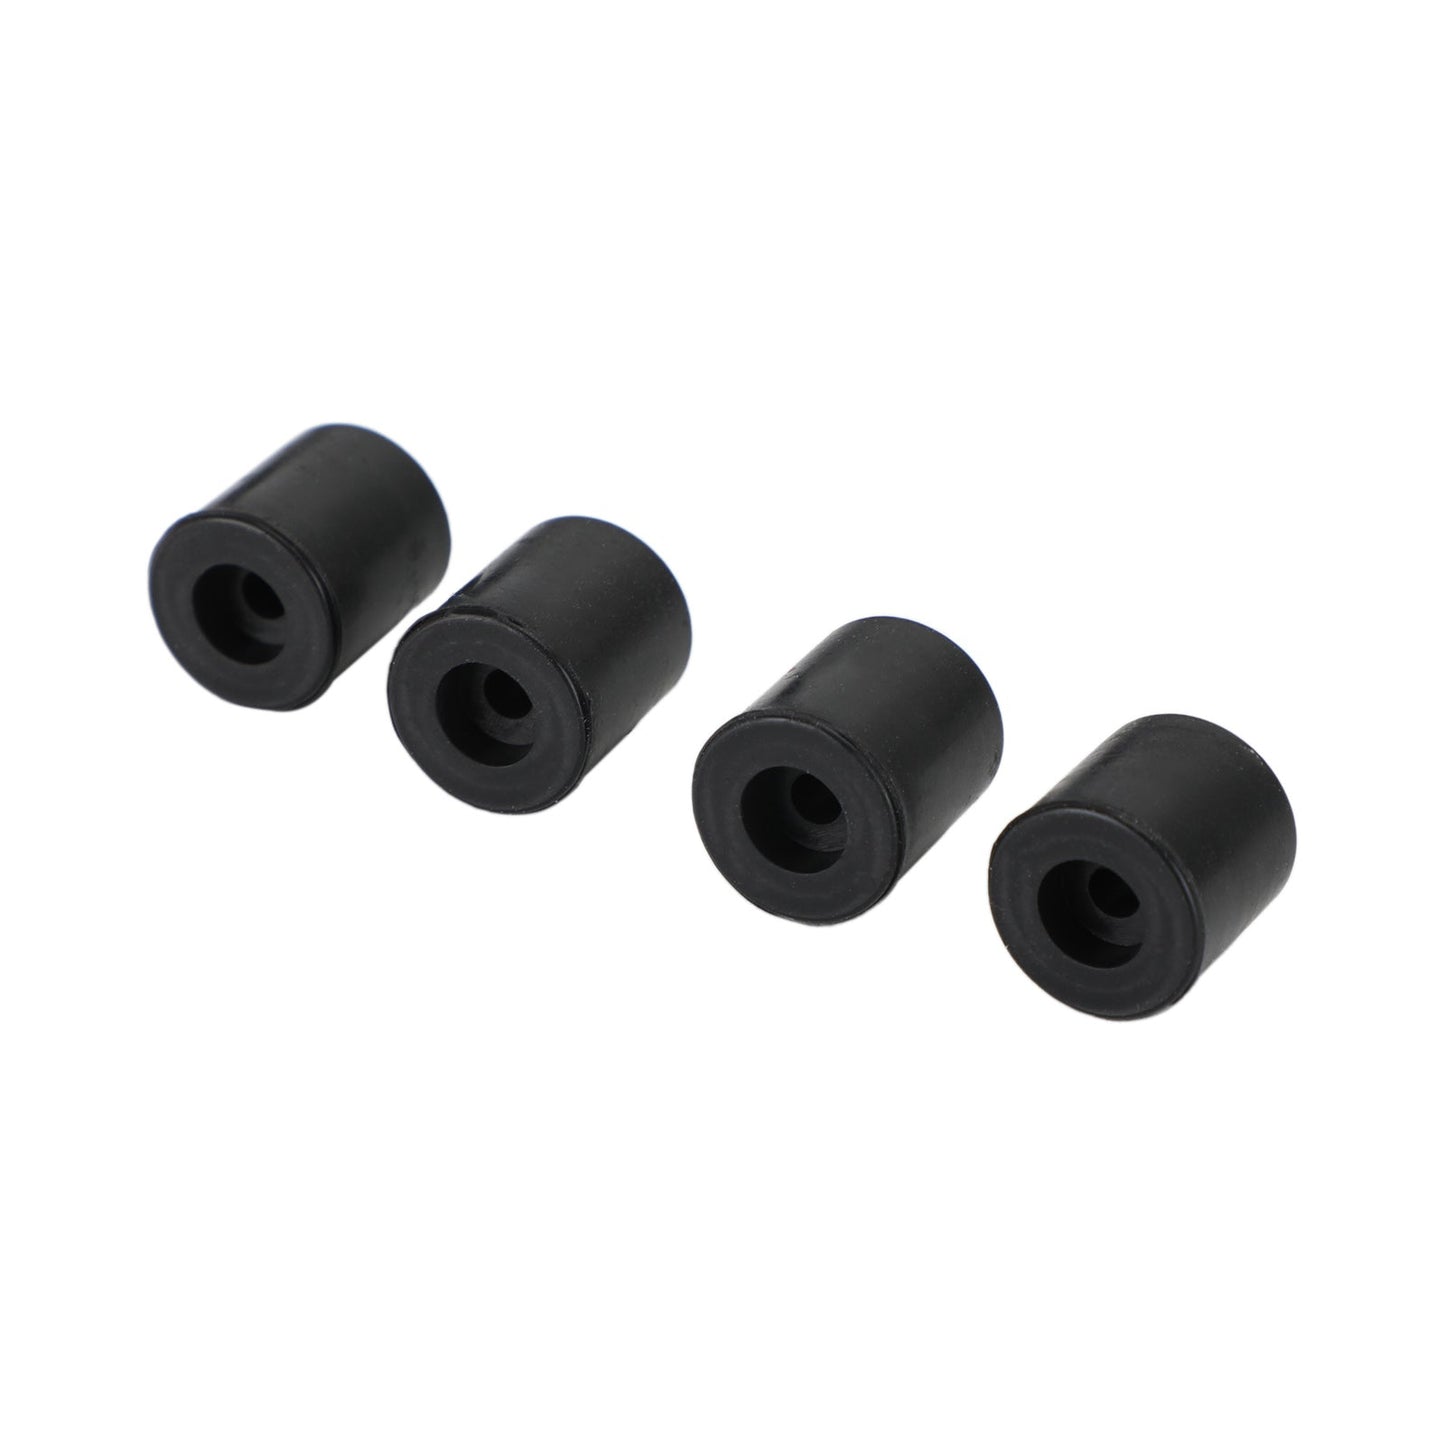 4pcs 3D Printer Silicone Bed Leveling Mount Column Spacer Auto Levelling Black